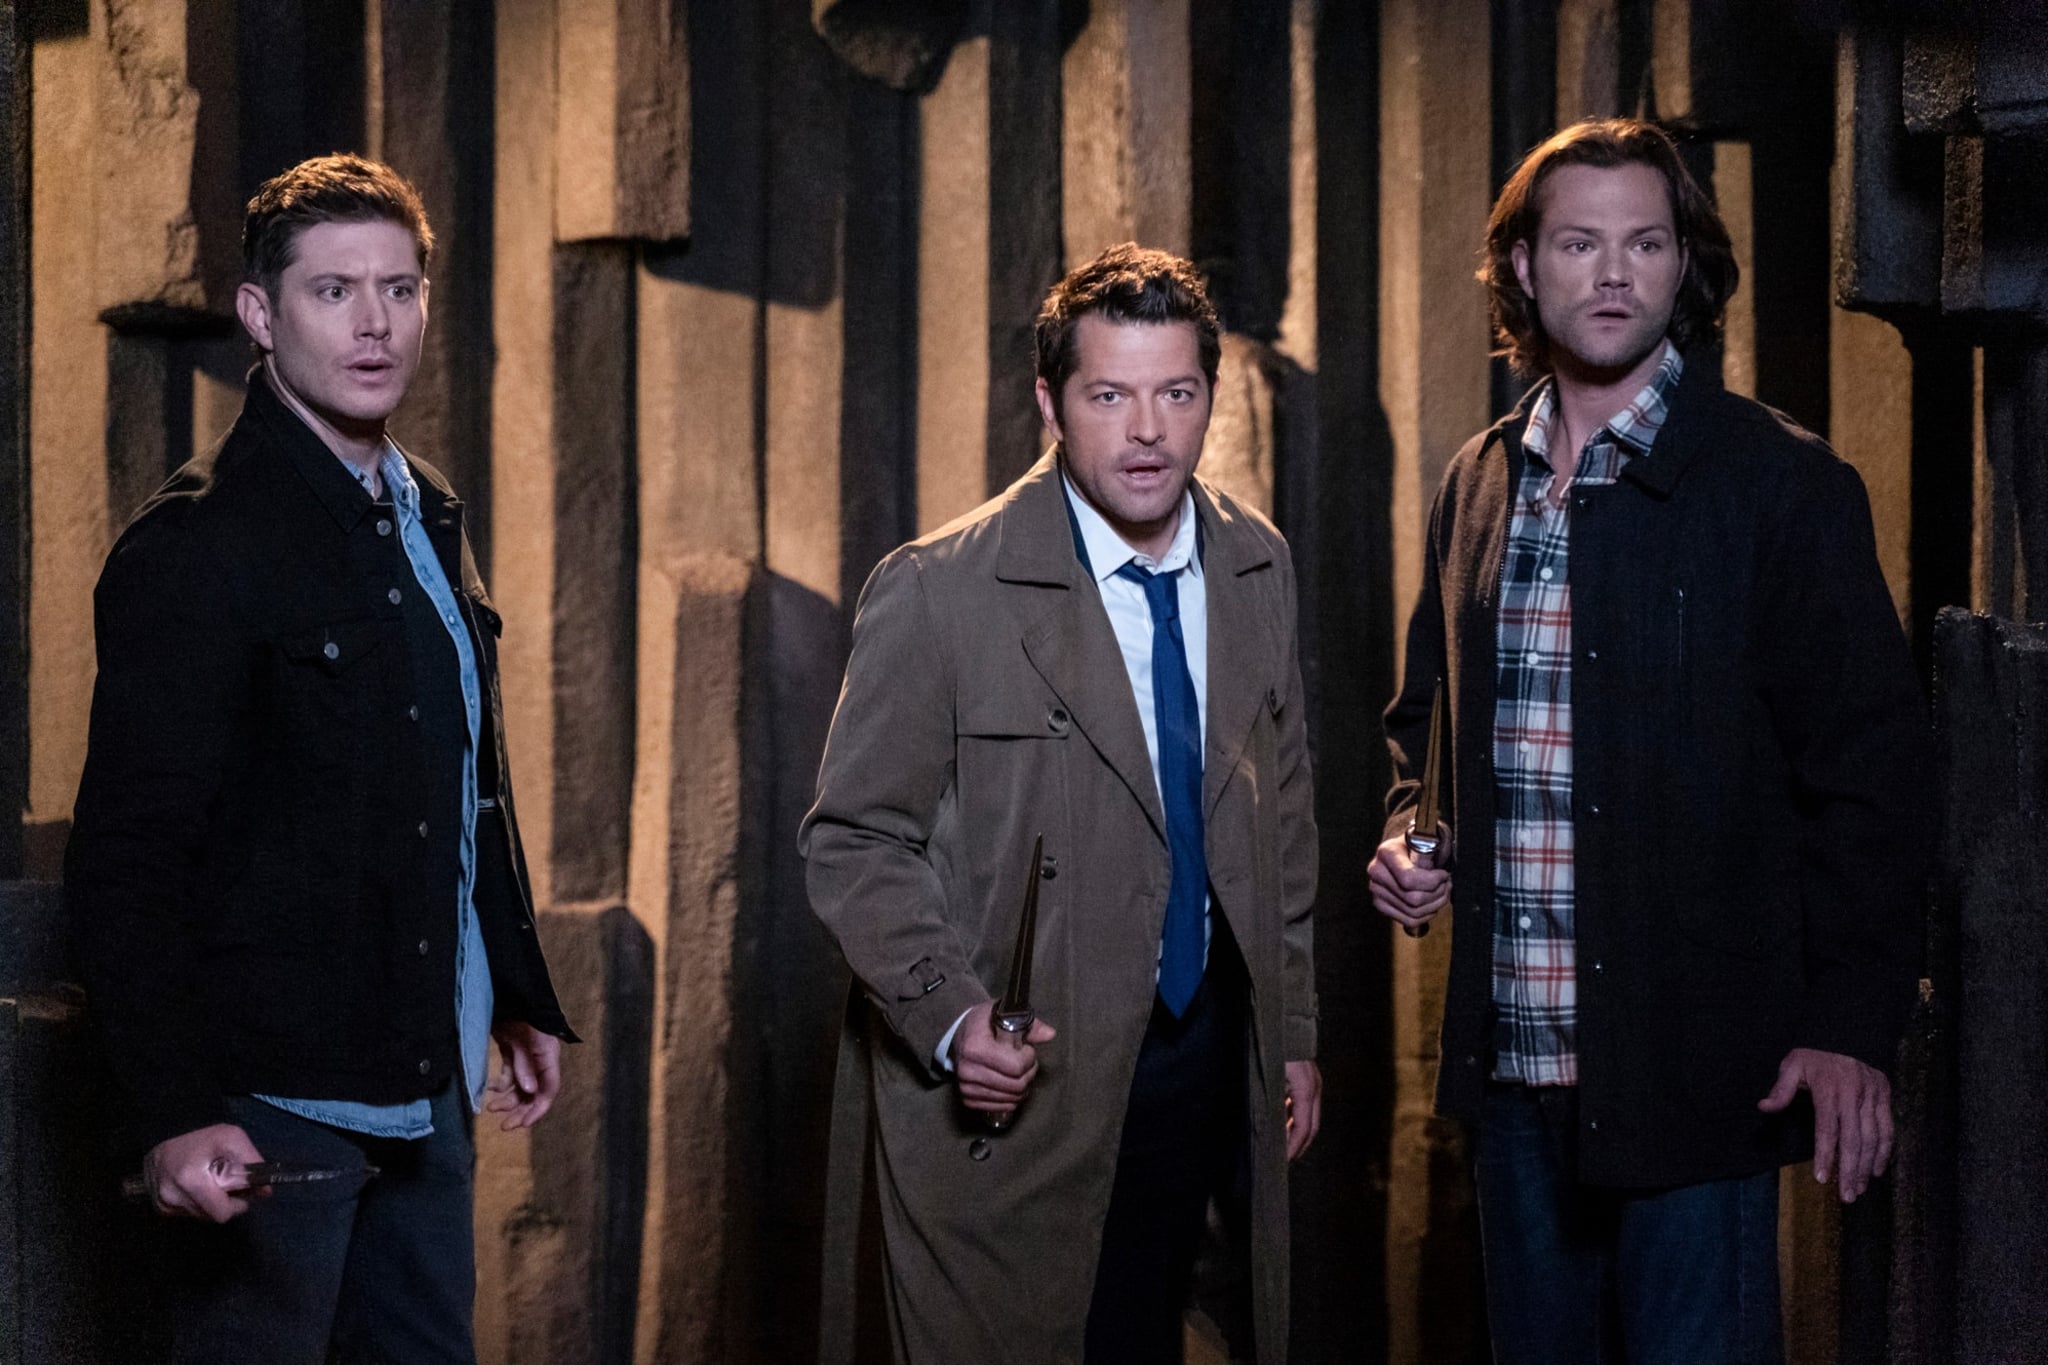 SUPERNATURAL, from left: Jensen Ackles, Misha Collins, Jared Padalecki, 'Our Father, Who Aren't in Heaven', (Season 15, Episode 1508, aired Dec. 12, 2019), photo: Colin Bentley / The CW / Courtesy Everett Collection